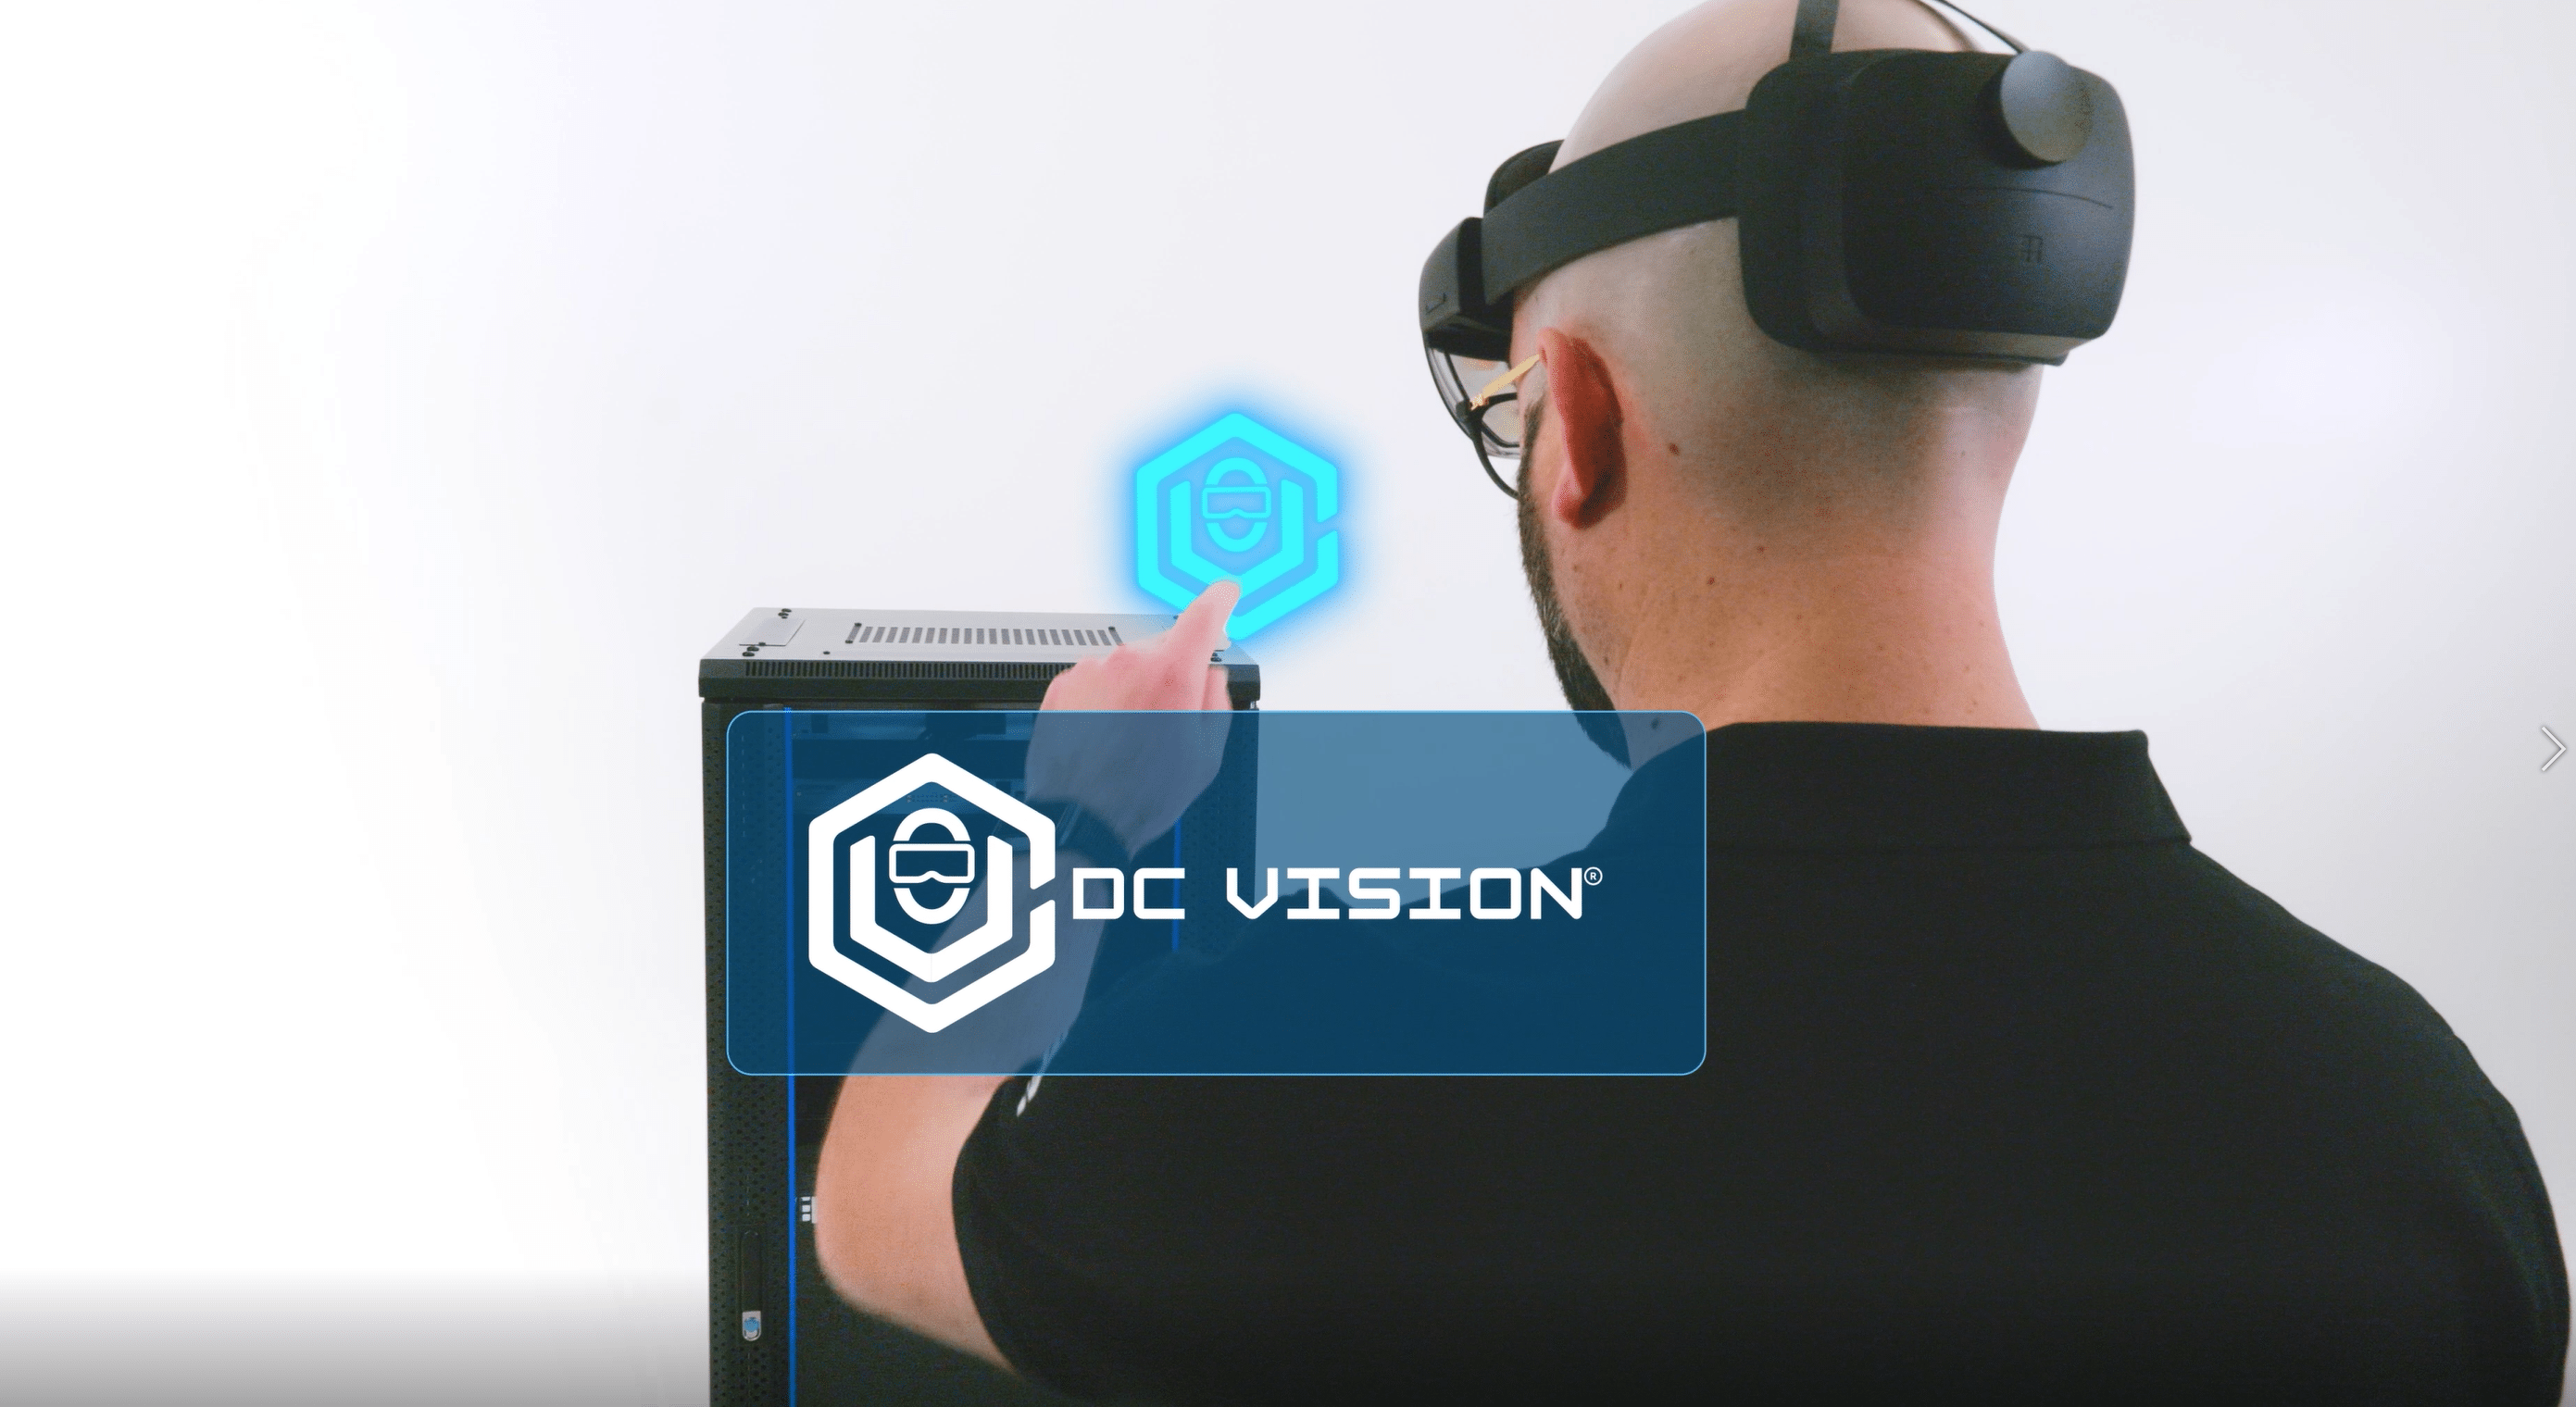 DC Vision is a futuristic program that uses augmented reality technology and artificial intelligence.